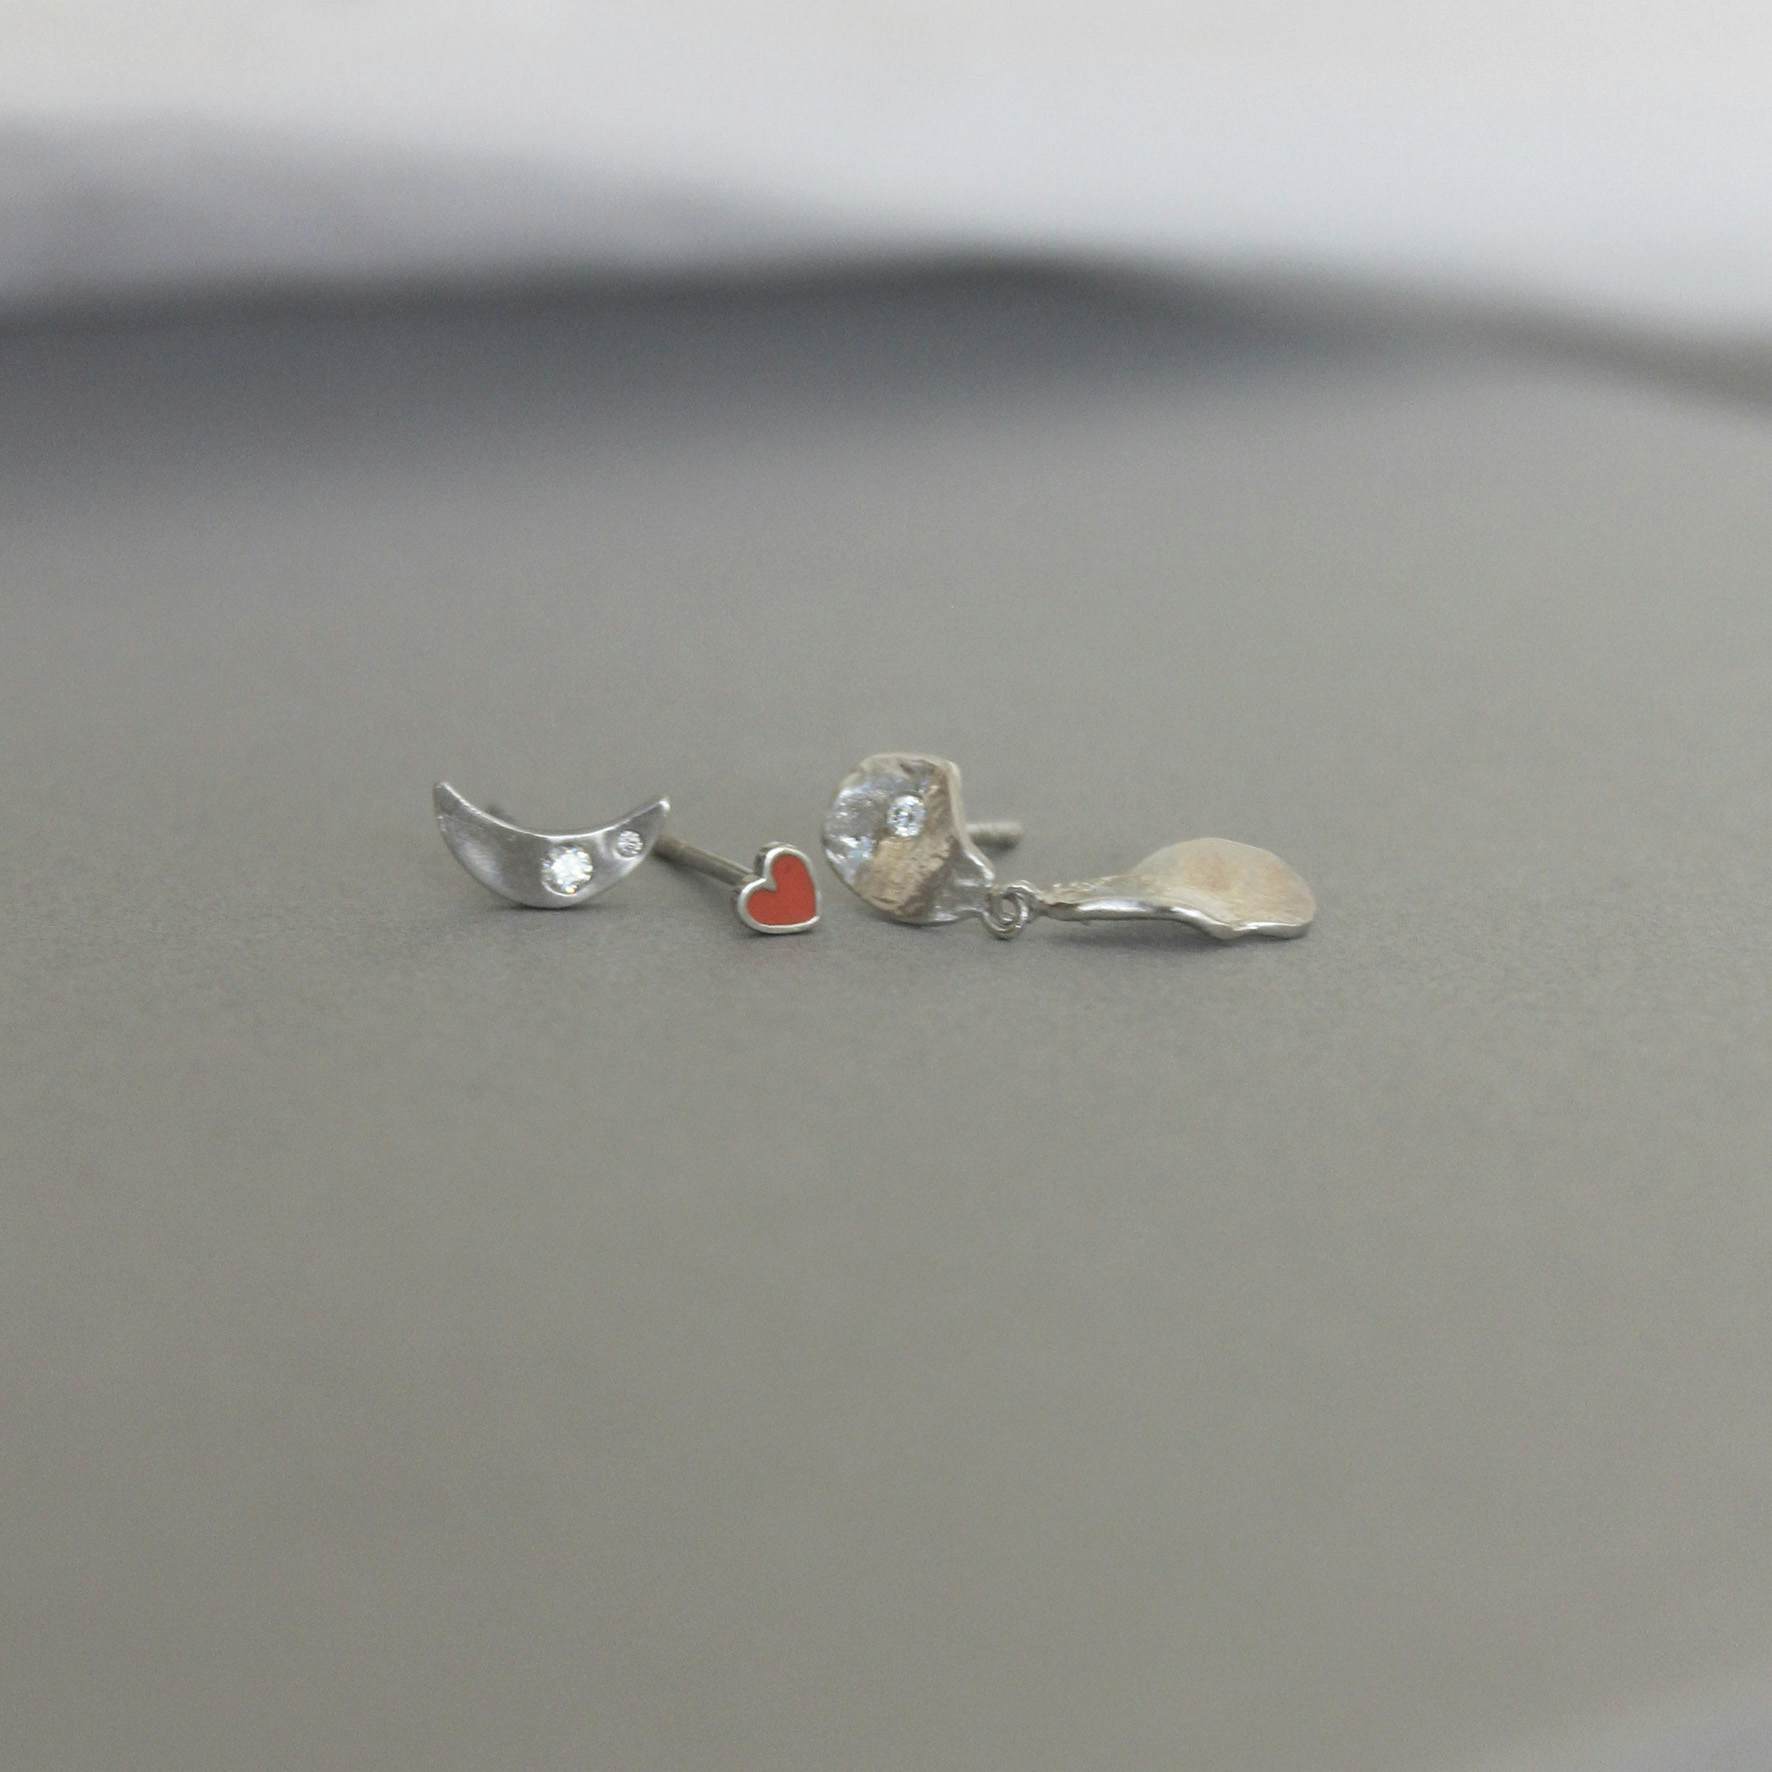 Clear Sea Earring With Stone from STINE A Jewelry in Silver Sterling 925